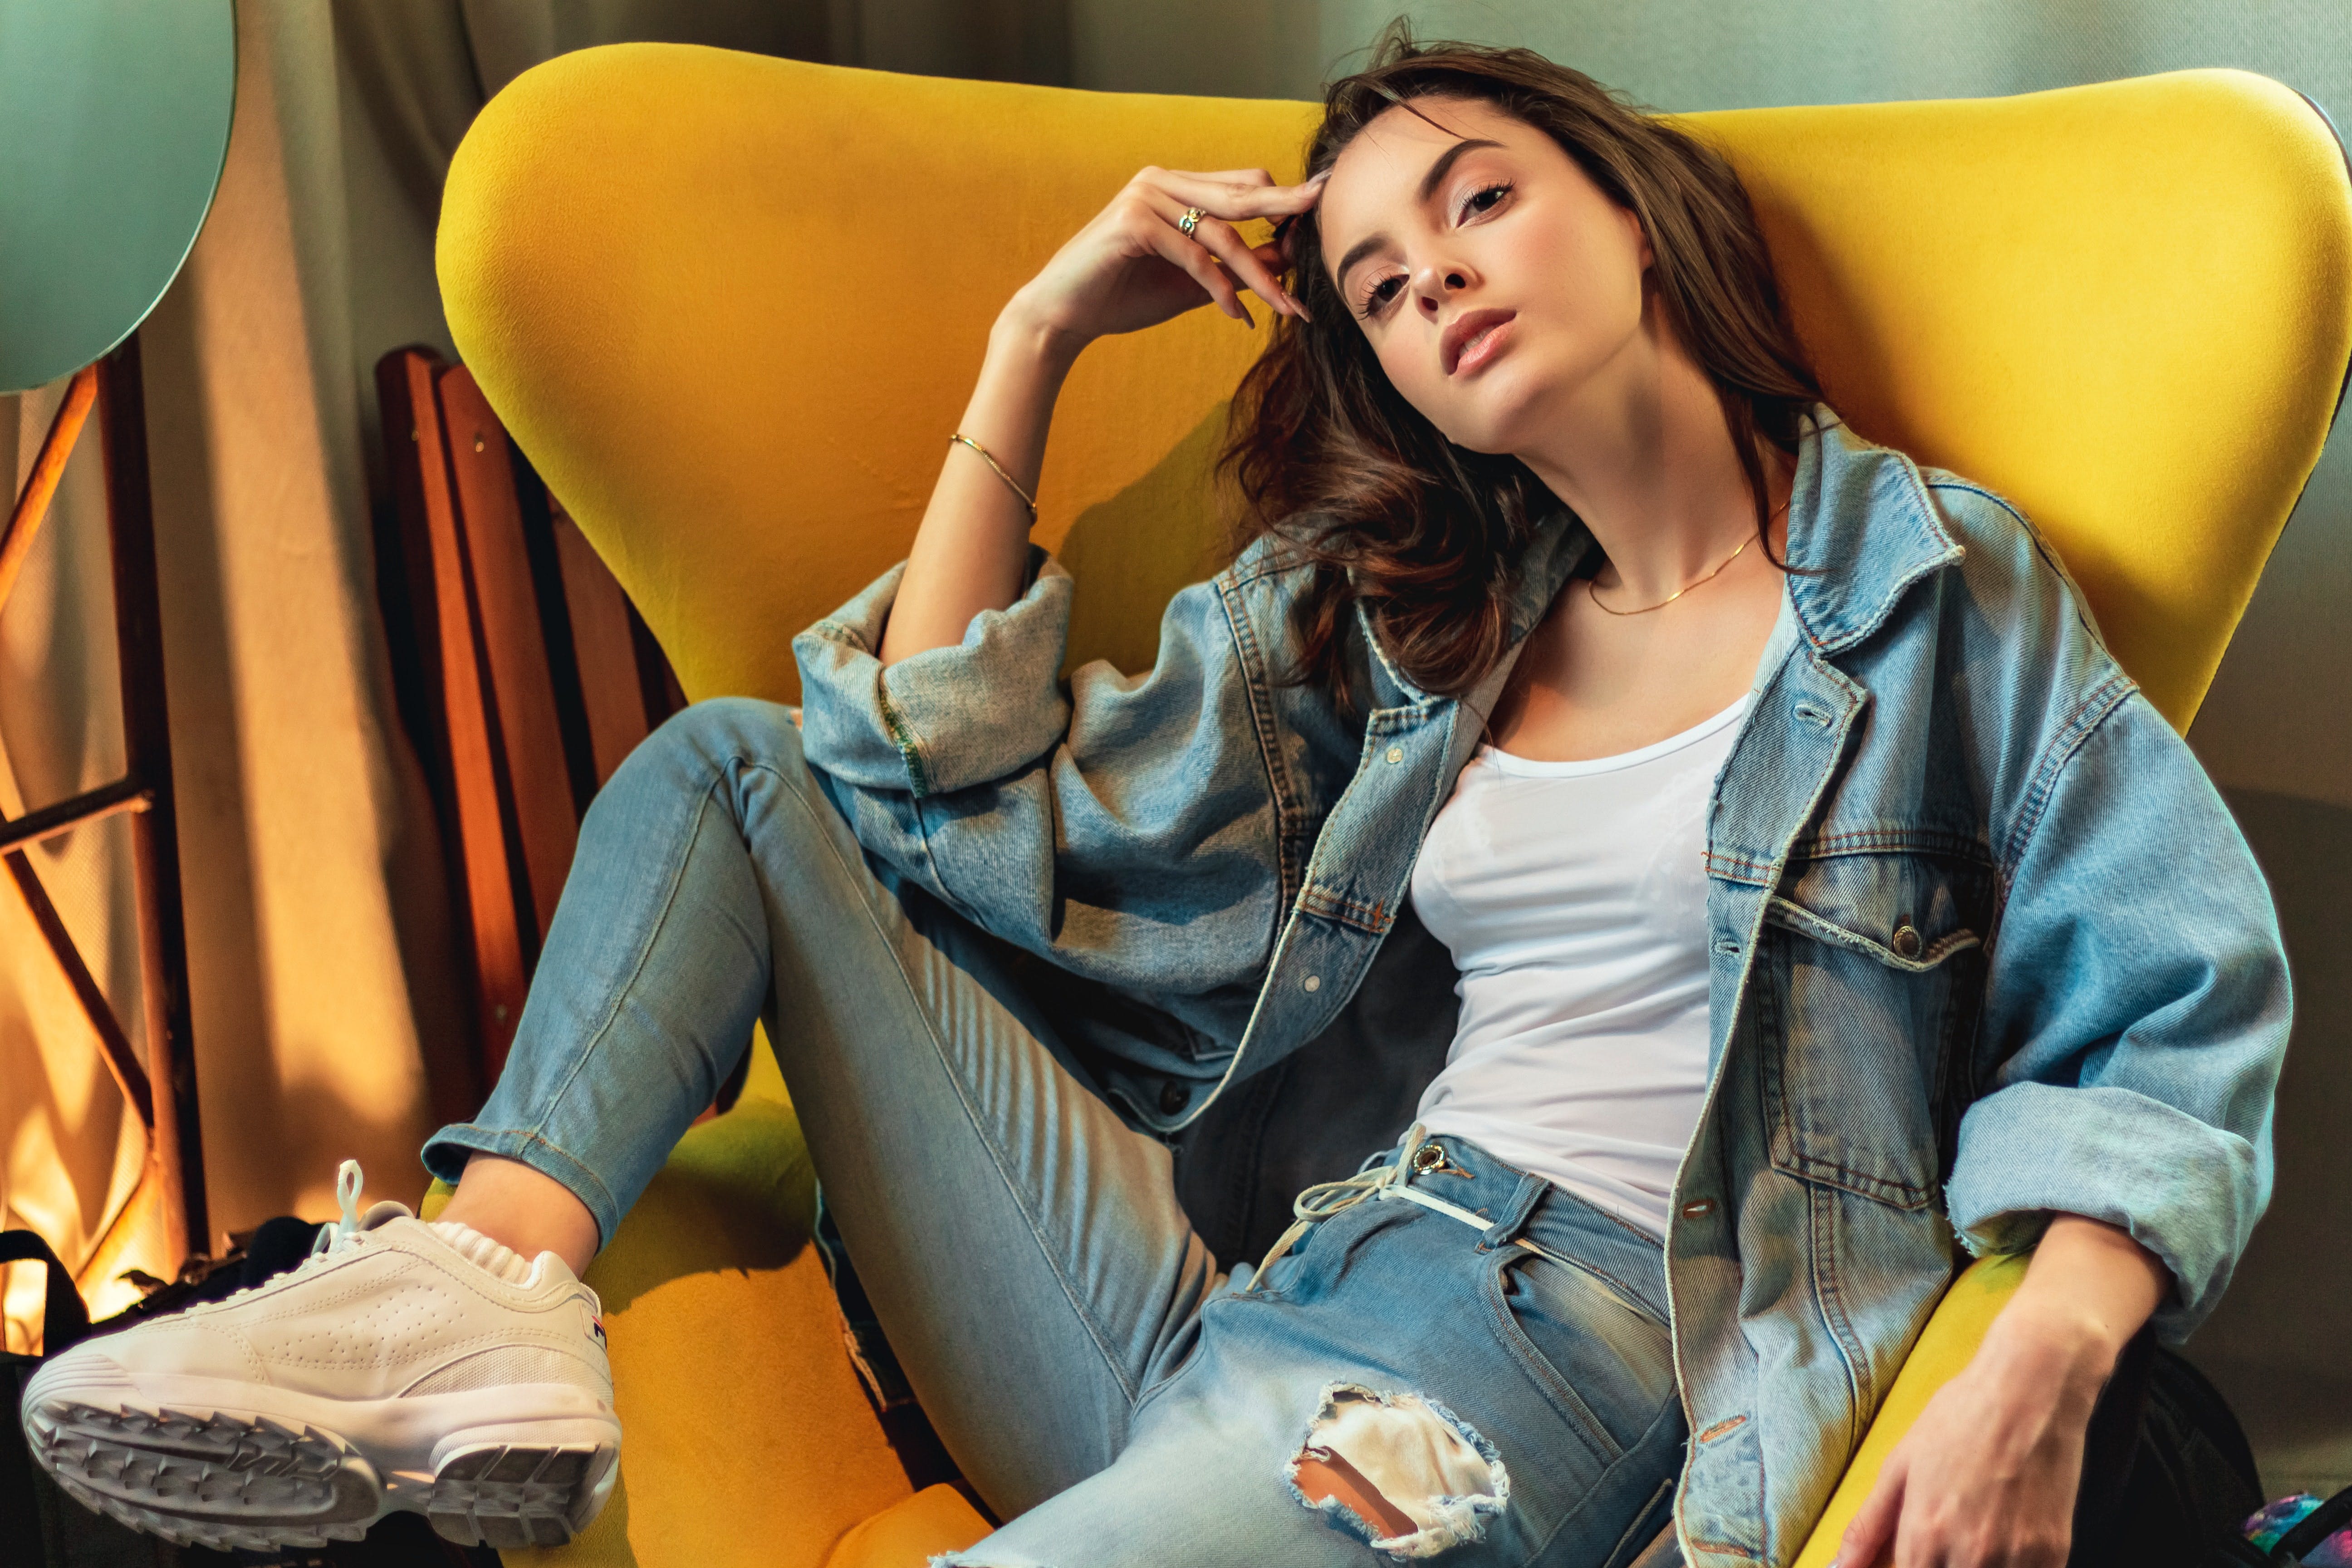 Female brand ambassador in jeans clothes sits in a yellow chair